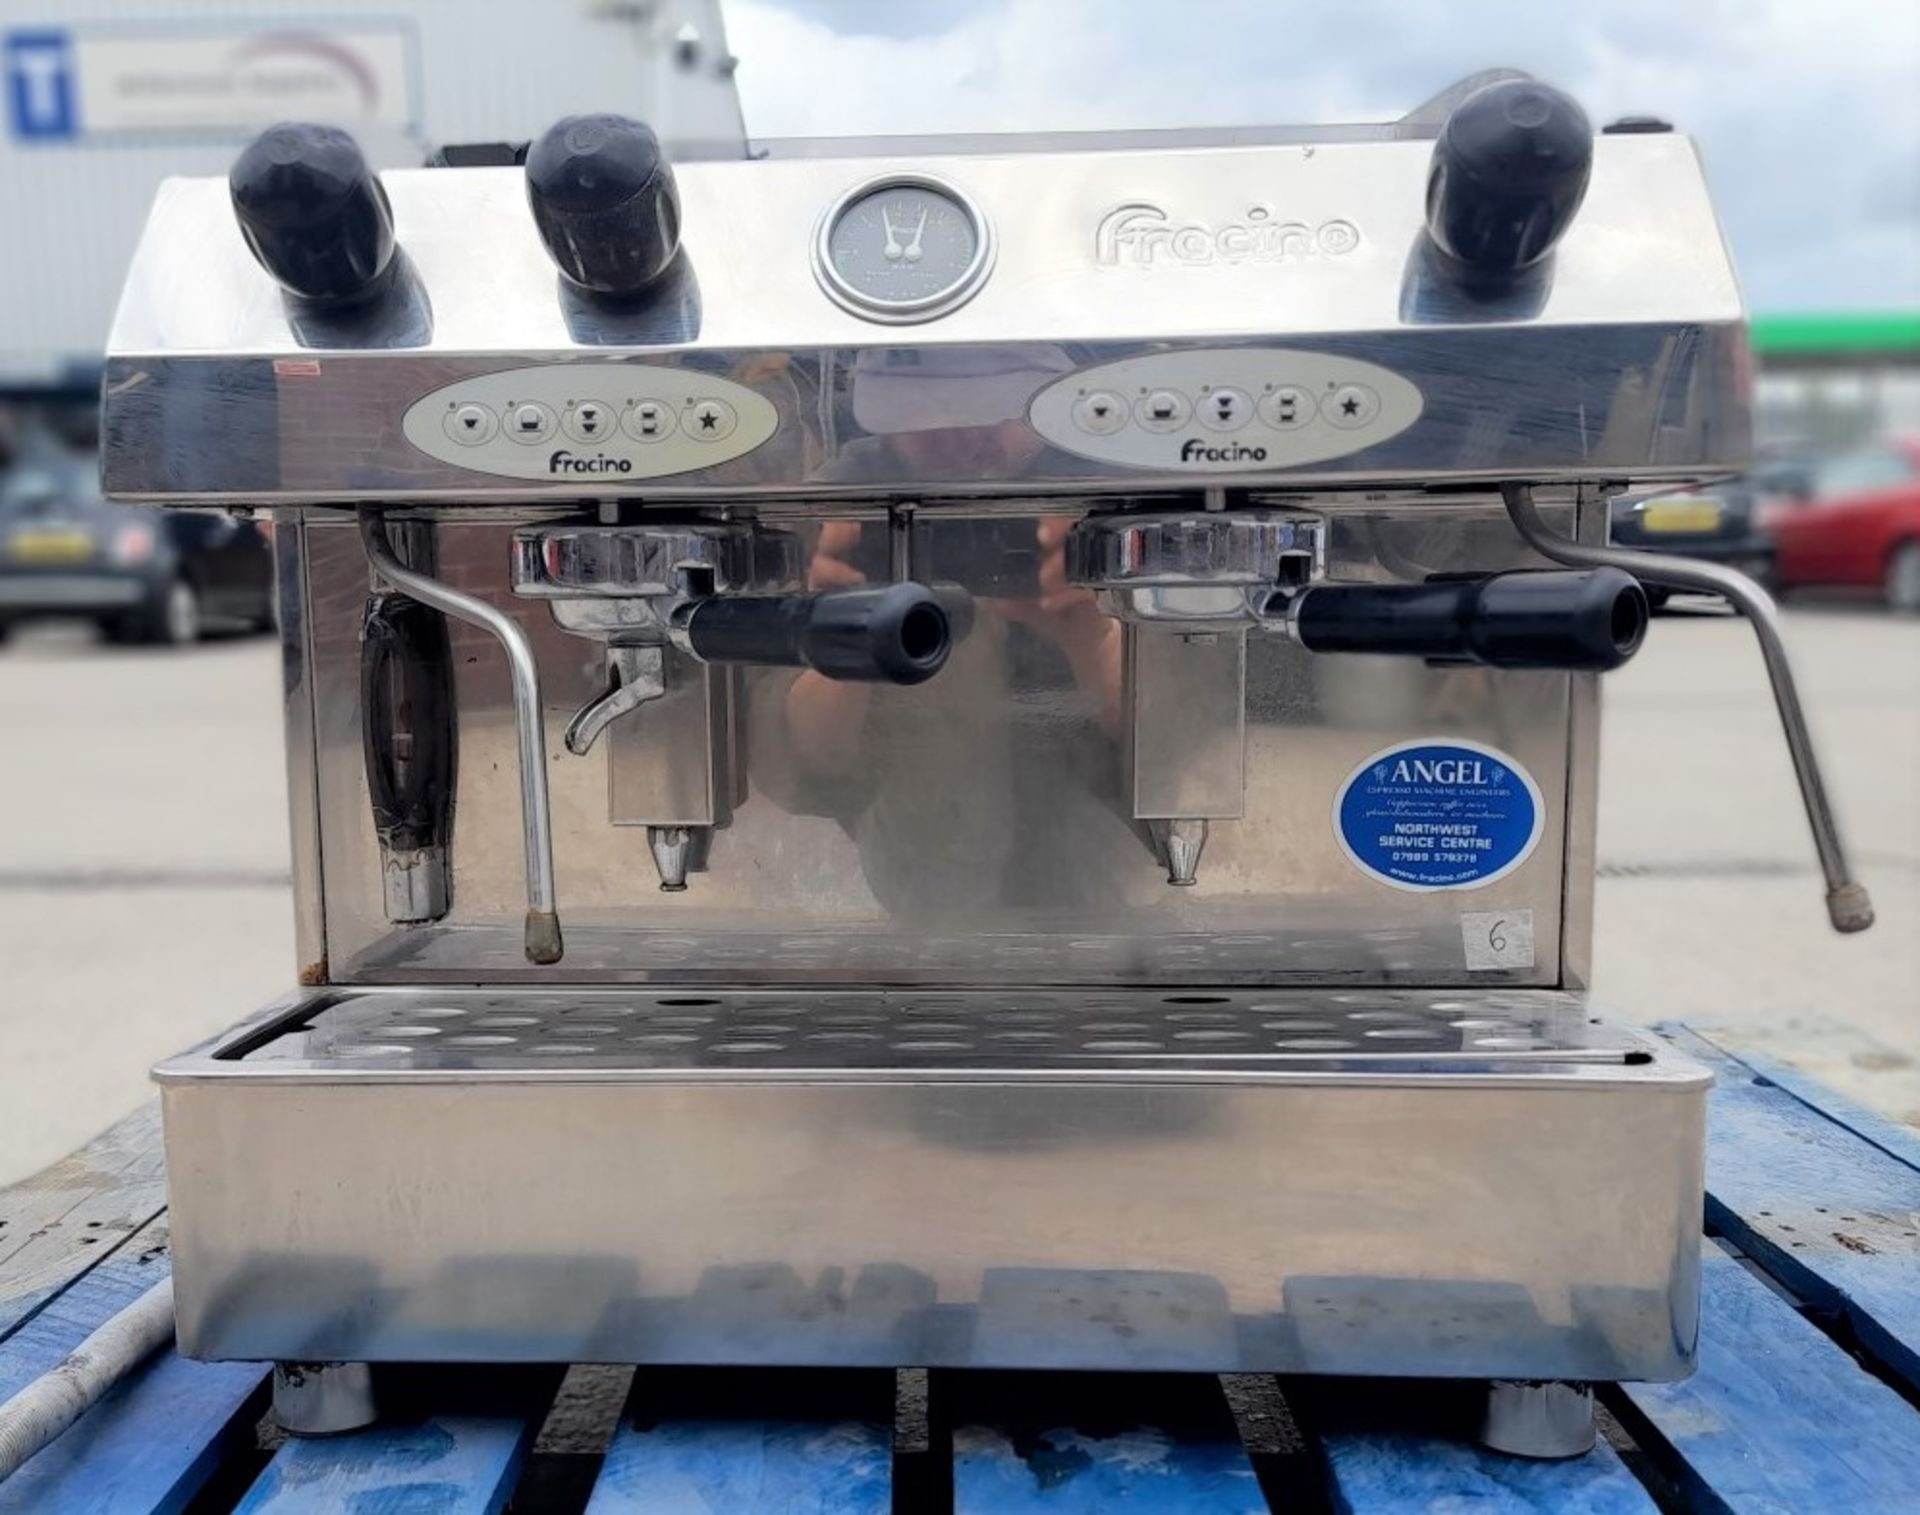 1 x Francino Bambino 2 Group Automatic Espresso Coffee Machine - Stainless Steel Finish - 240v Power - Image 6 of 8